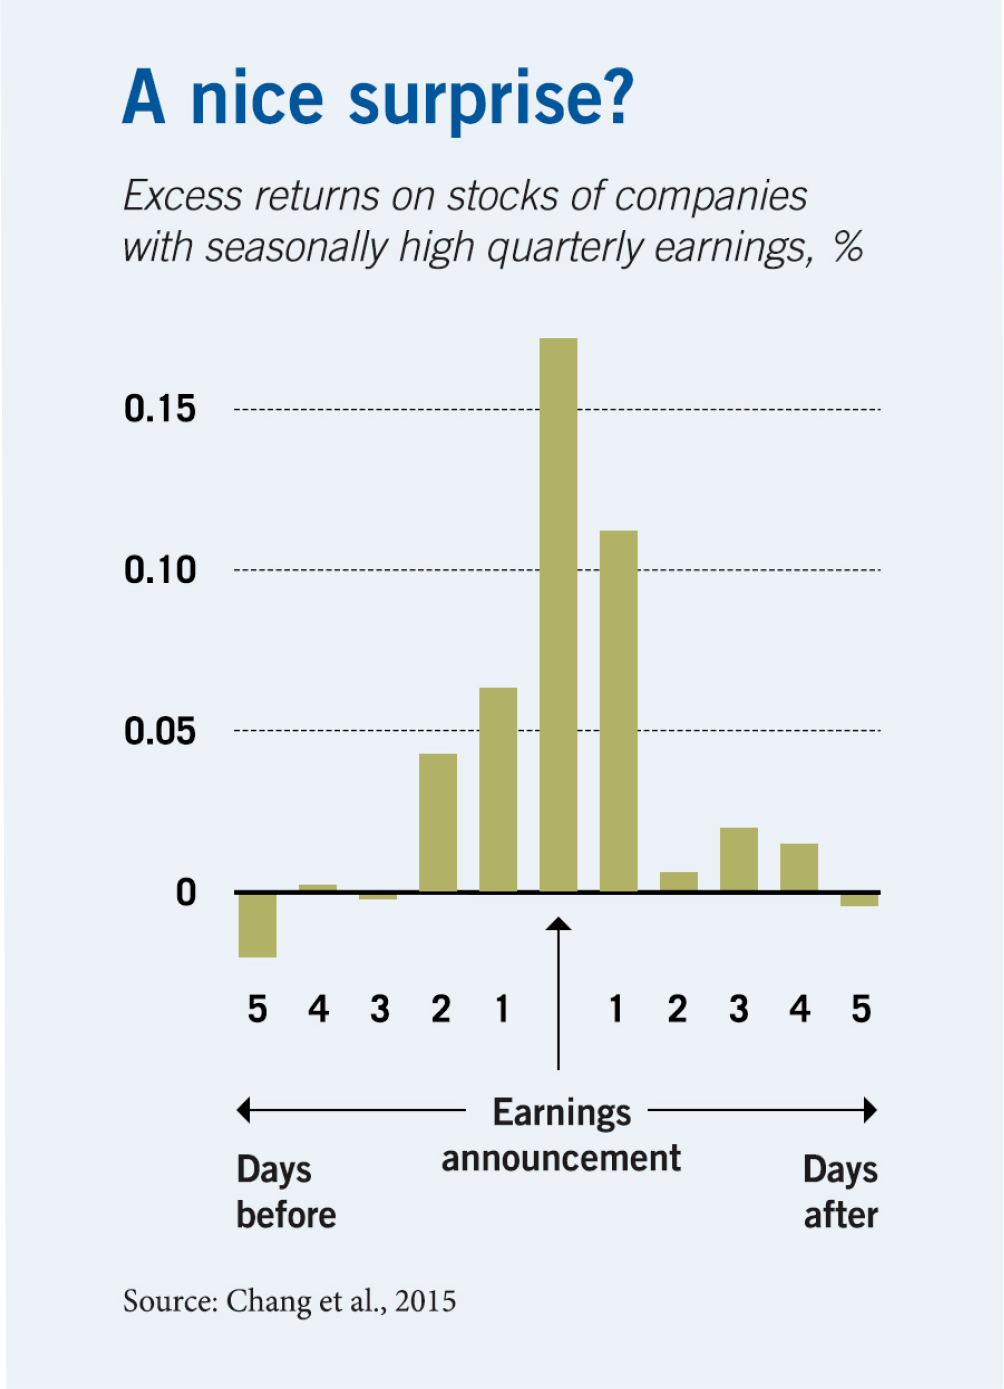 A bar chart plotting excess returns on stocks of companies with seasonally high quarterly earnings, with percentages on the y-axis, and a timeline of days before and after an earnings announcement on the x-axis. The highest bar, at about zero-point-one-seven, is on the day of the announcement, with higher values ranging from zero-point-zero-four to zero-point-one-one over the two days before and the day after.